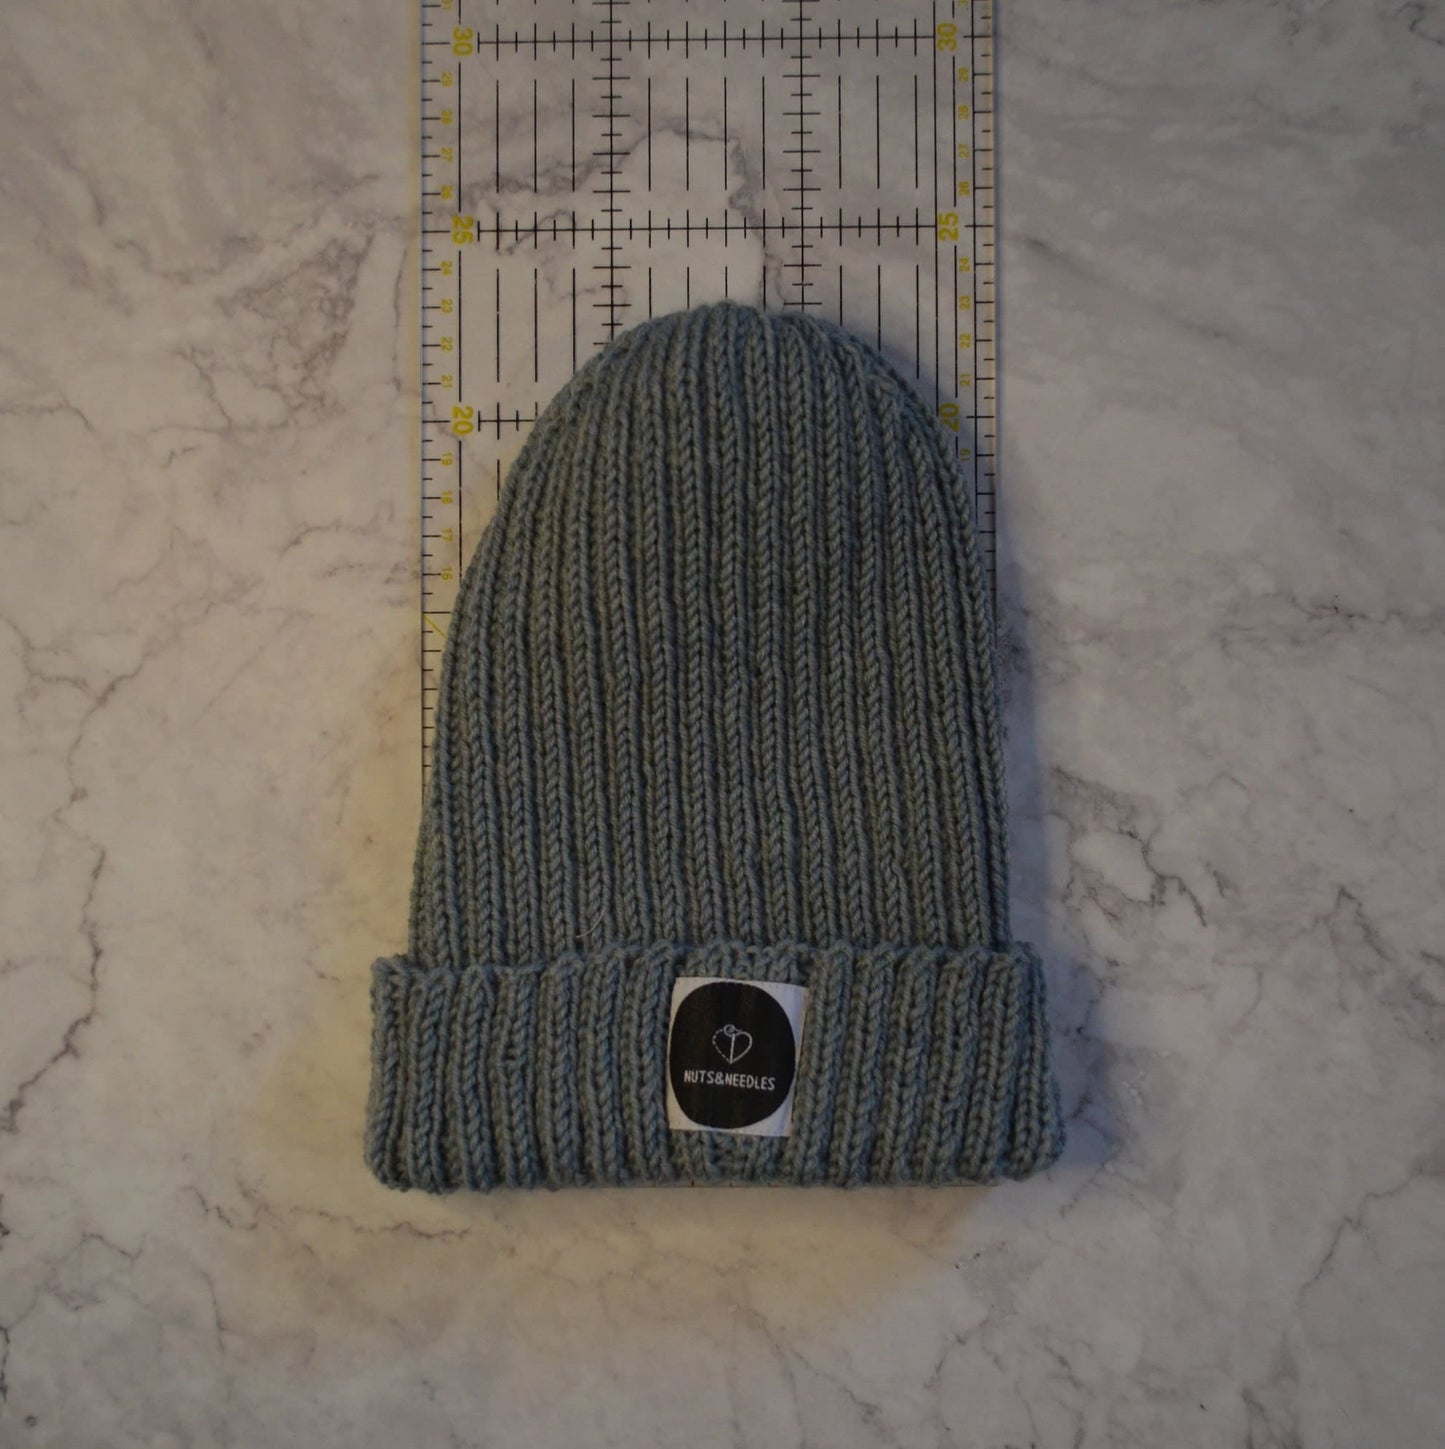 Beanie Anxiety Awareness, Mental Health, part of profit donated to Anxiety Charity, handmade knitwear, knit Merino wool beanie, self care